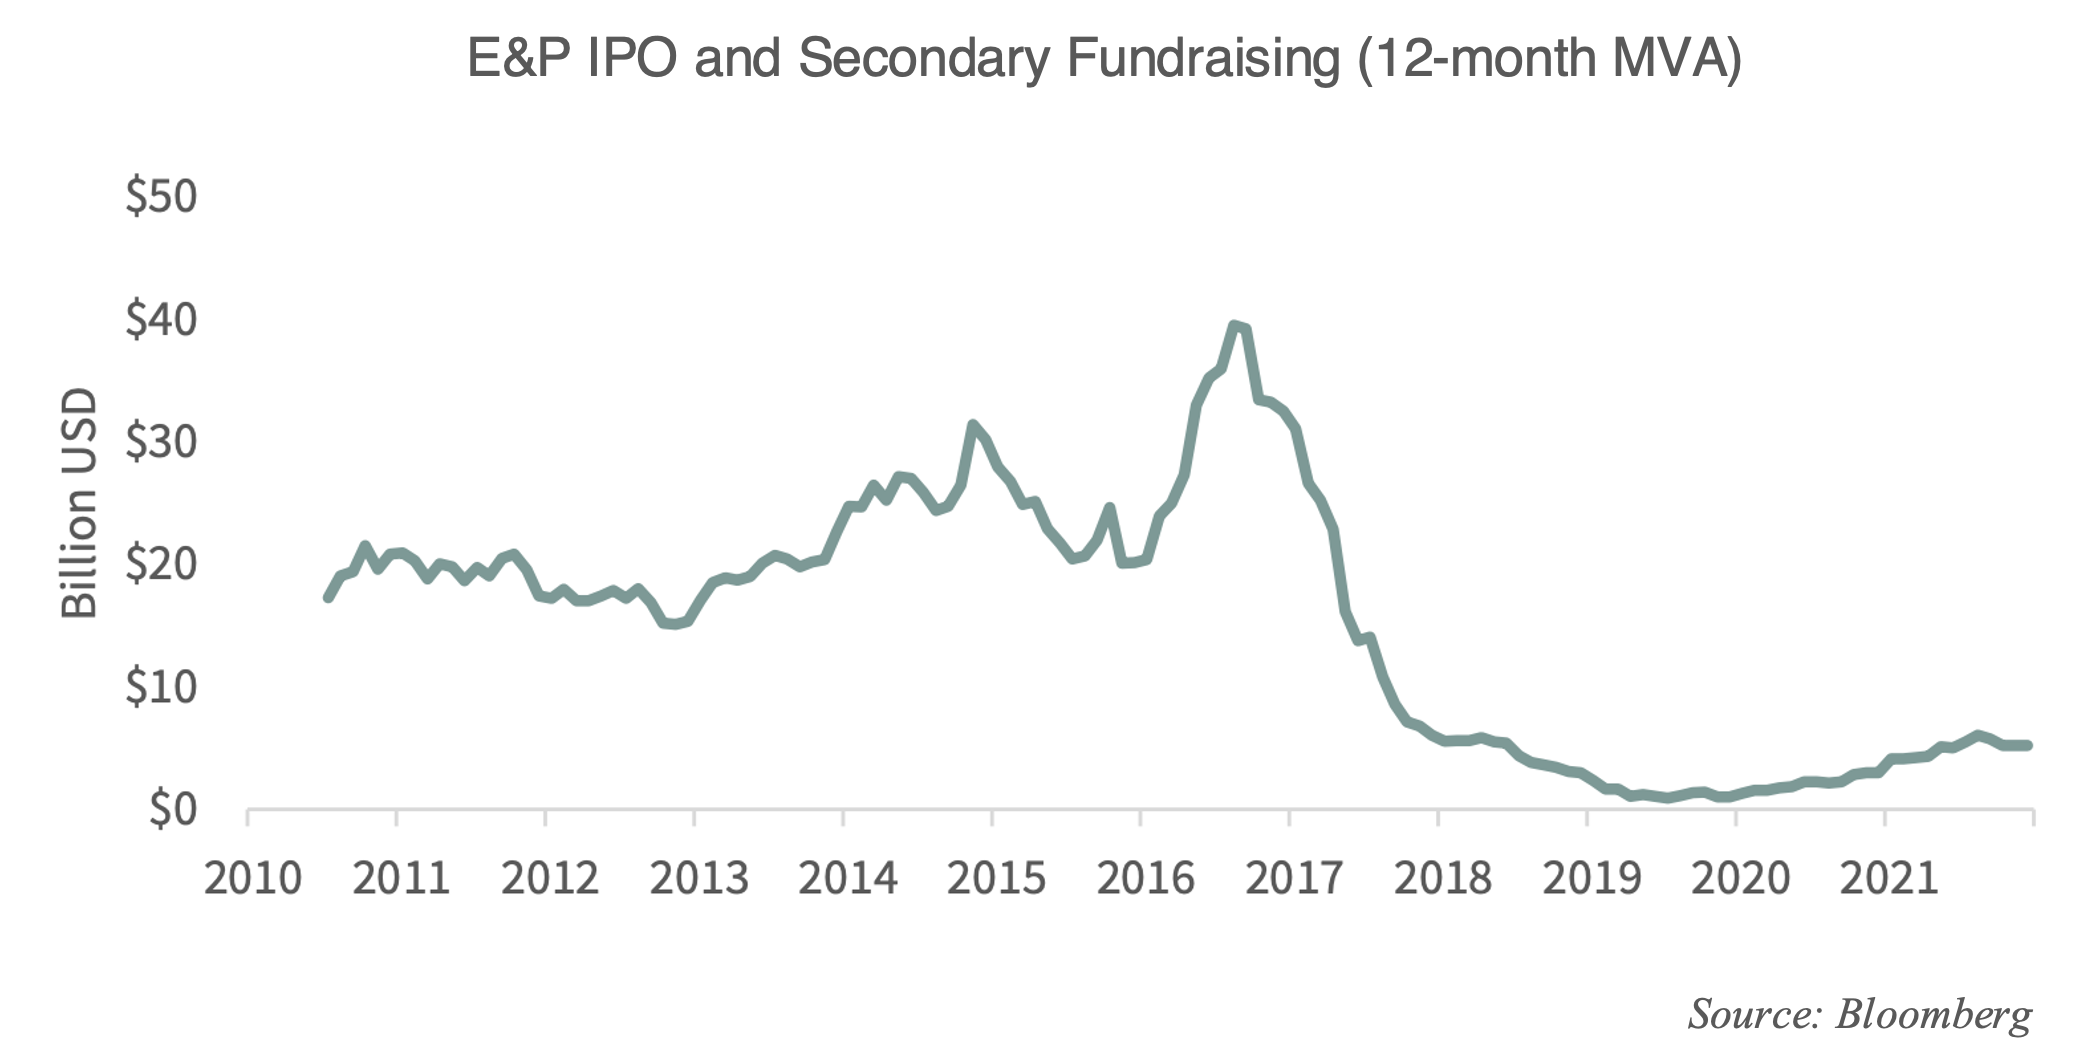 E&P IPO and Secondary Fundraising